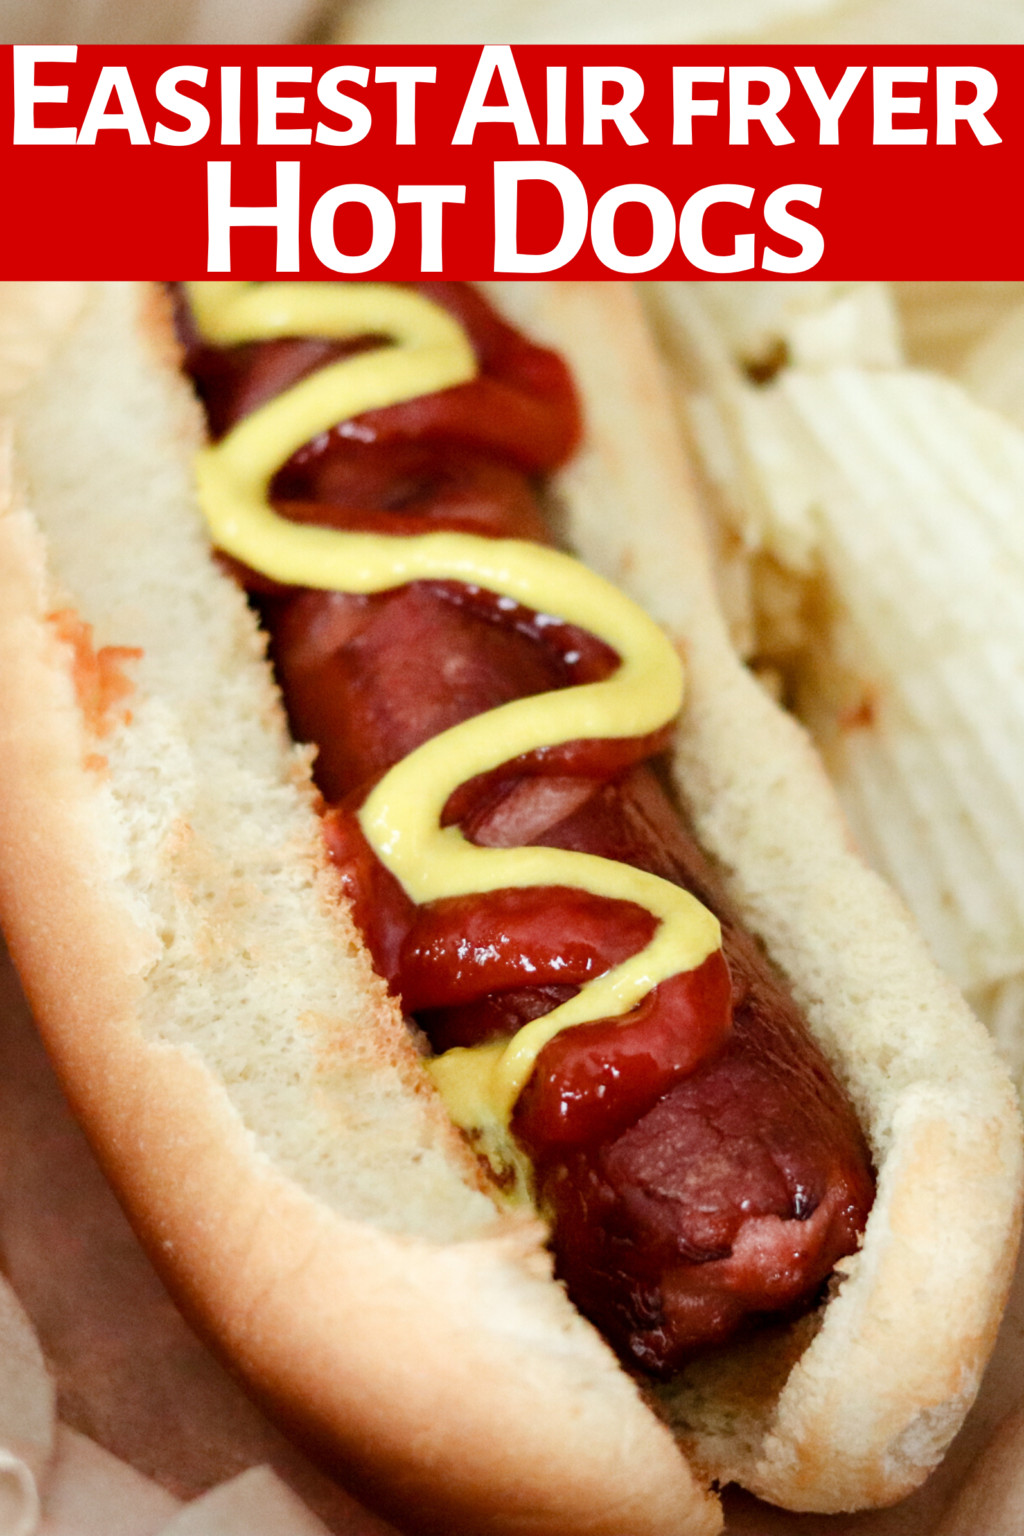 Don’t Miss Our 15 Most Shared Hot Dogs In the Air Fryer